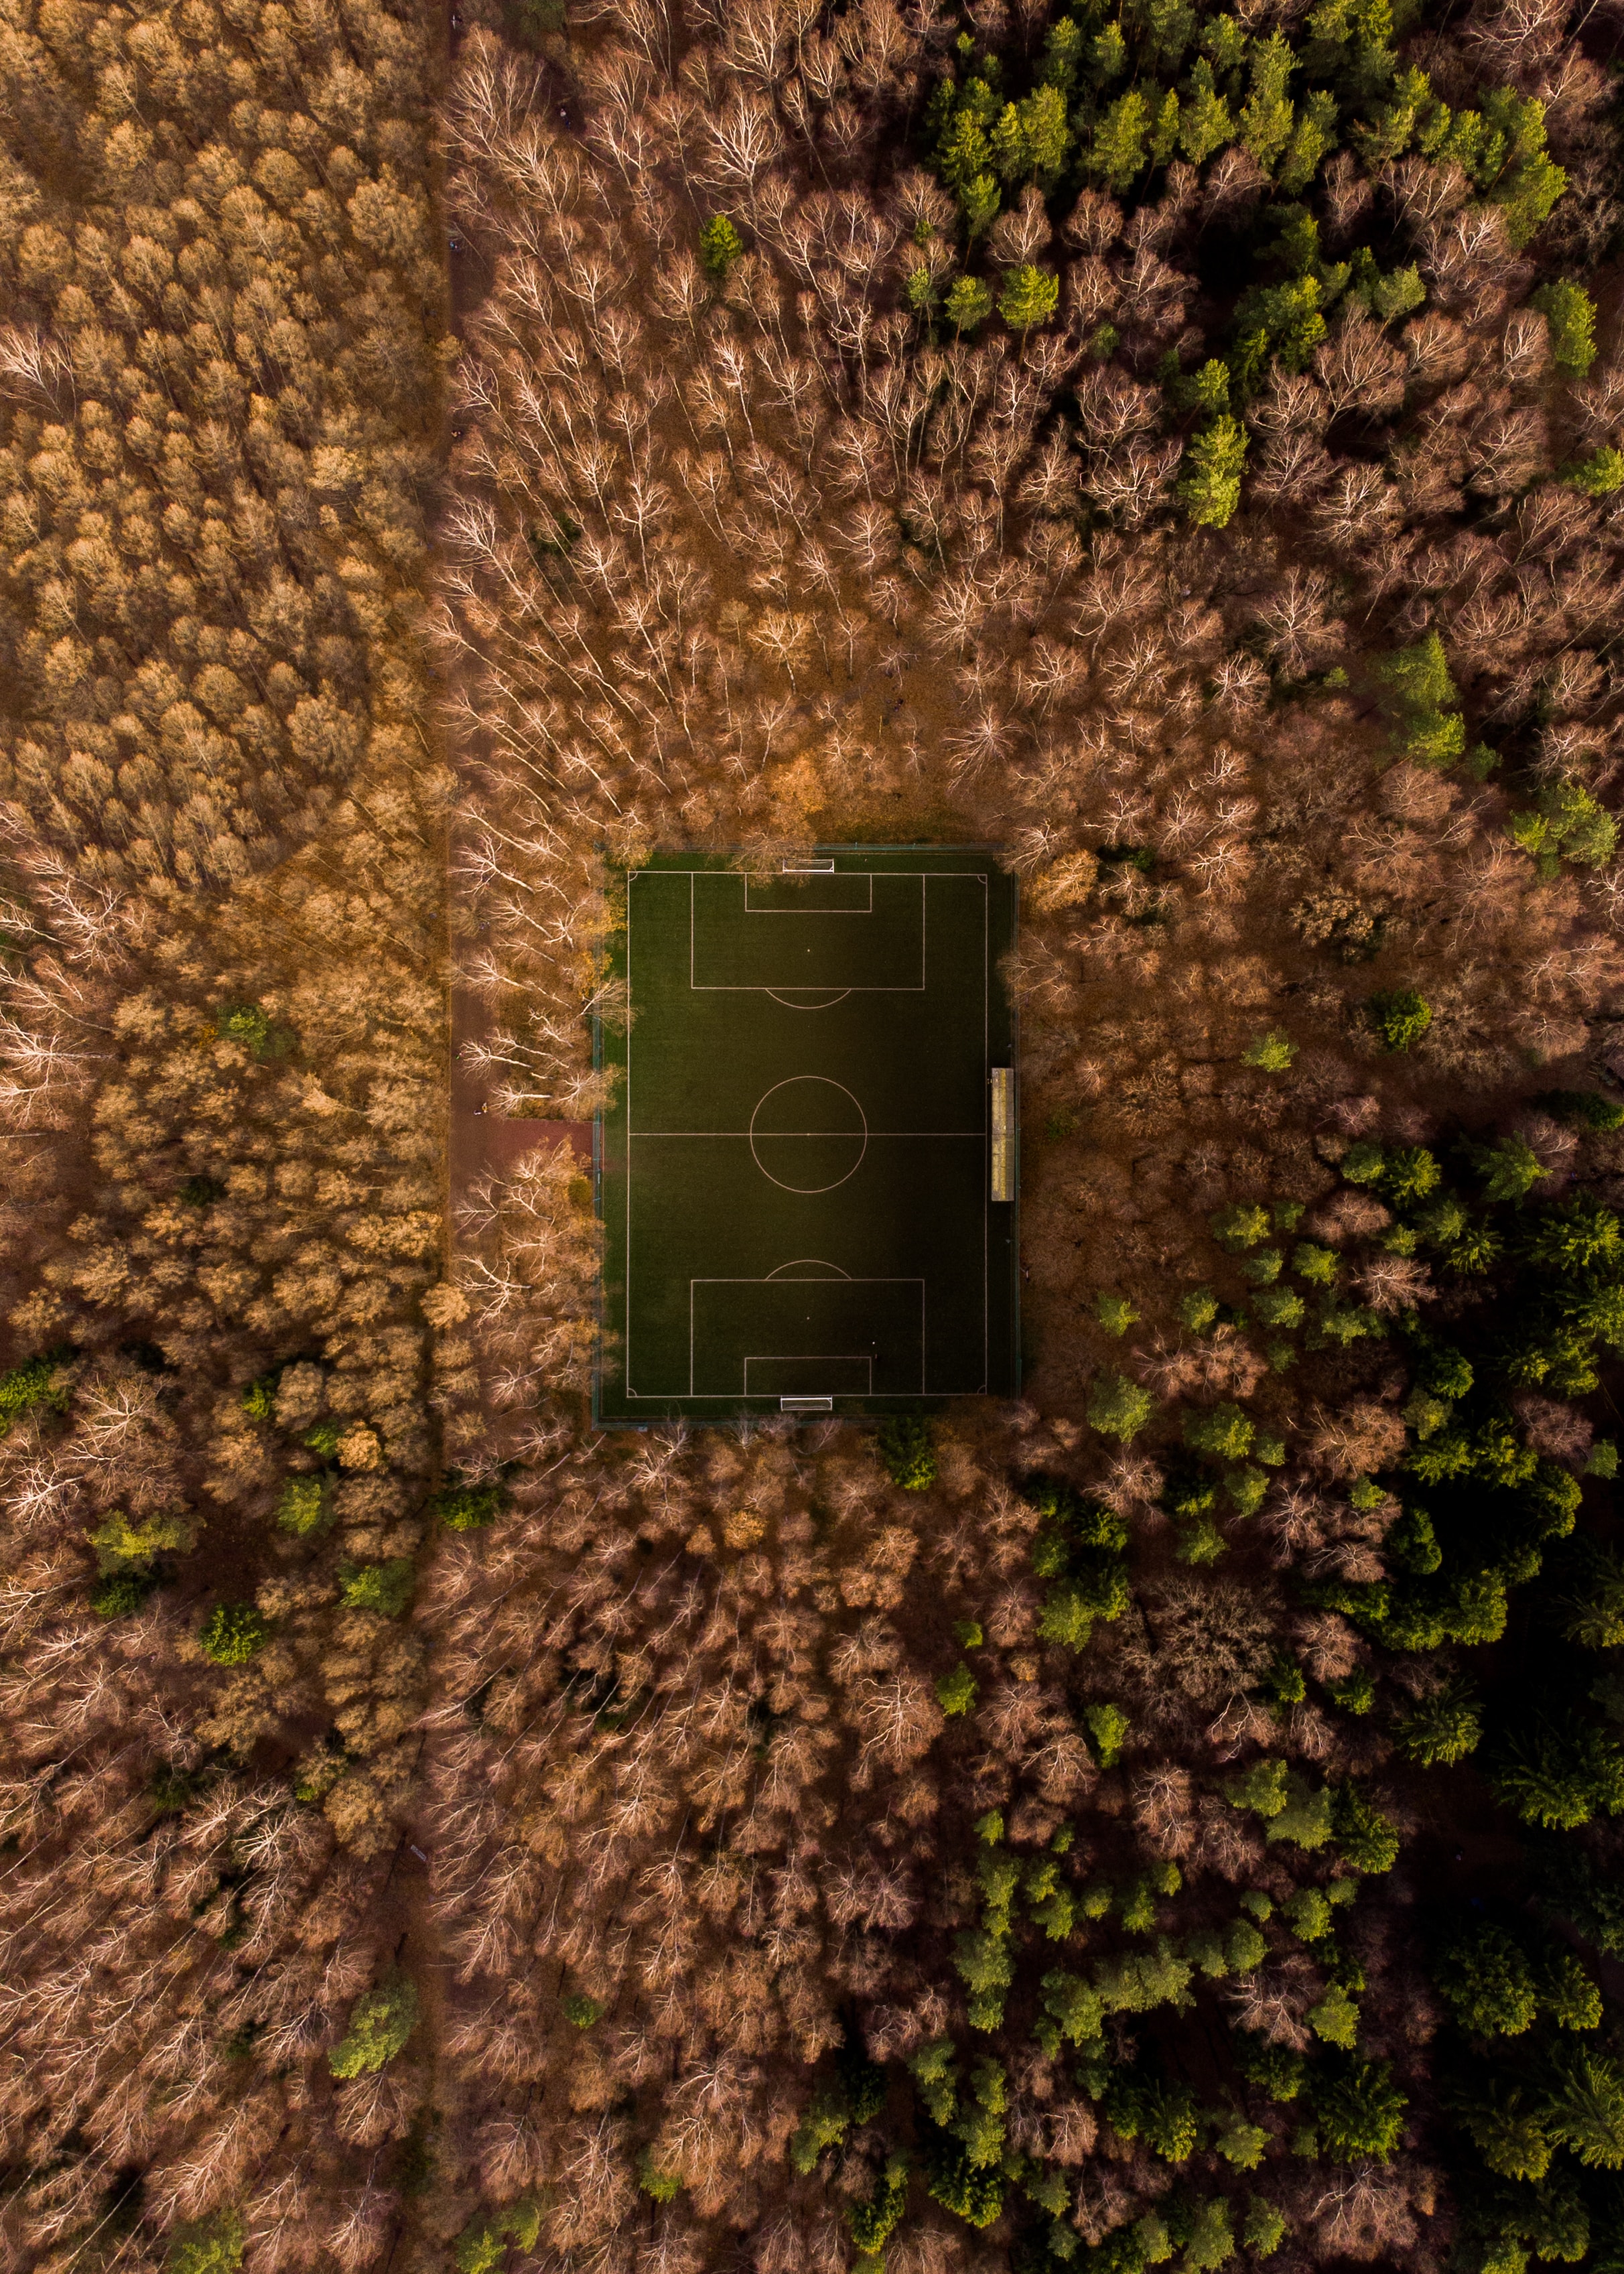 android football field, nature, trees, view from above, playground, platform, overview, review